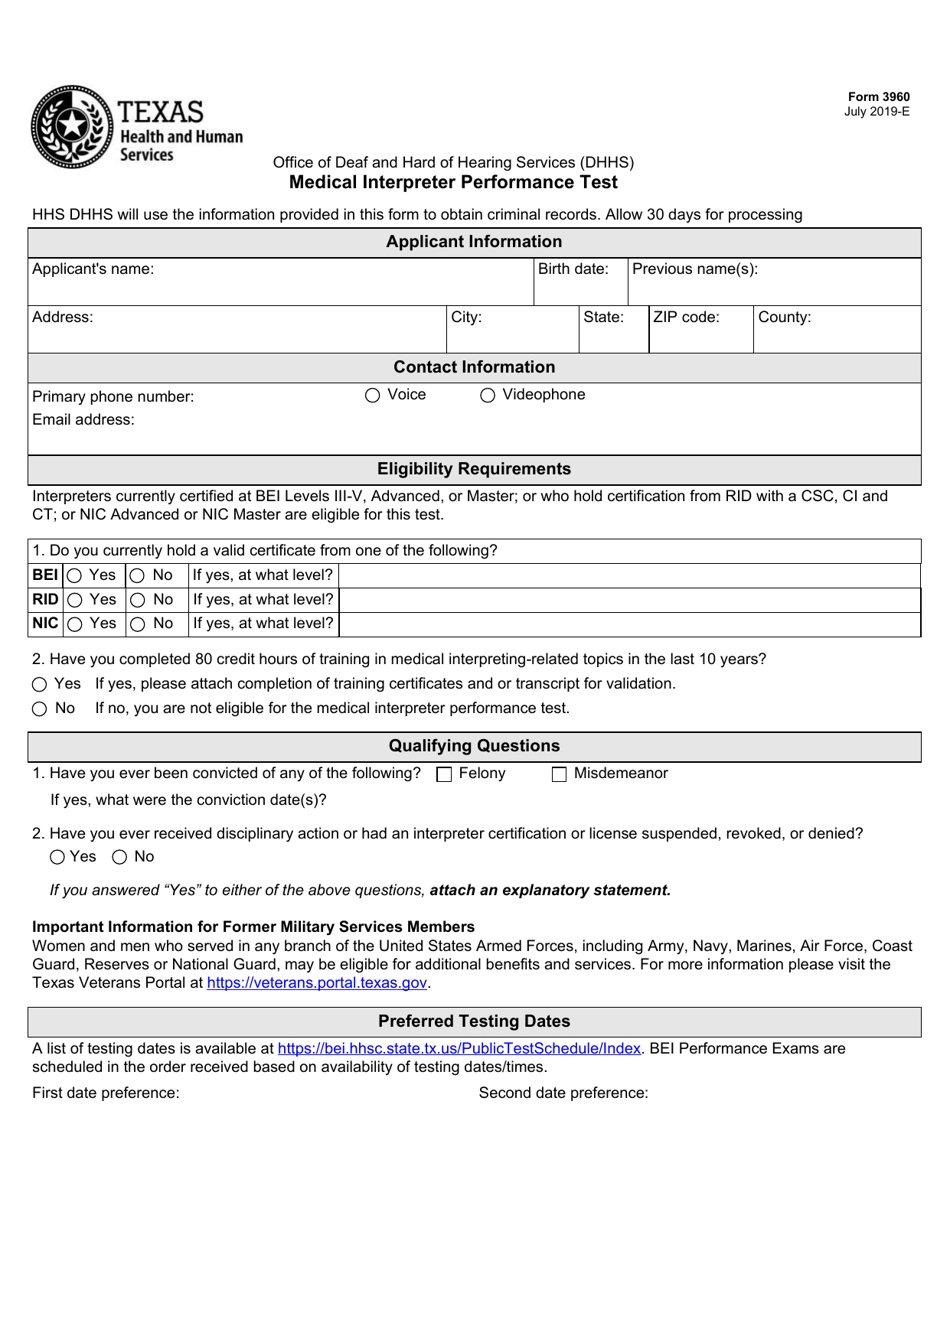 Form 3960 Medical Interpreter Performance Test - Texas, Page 1